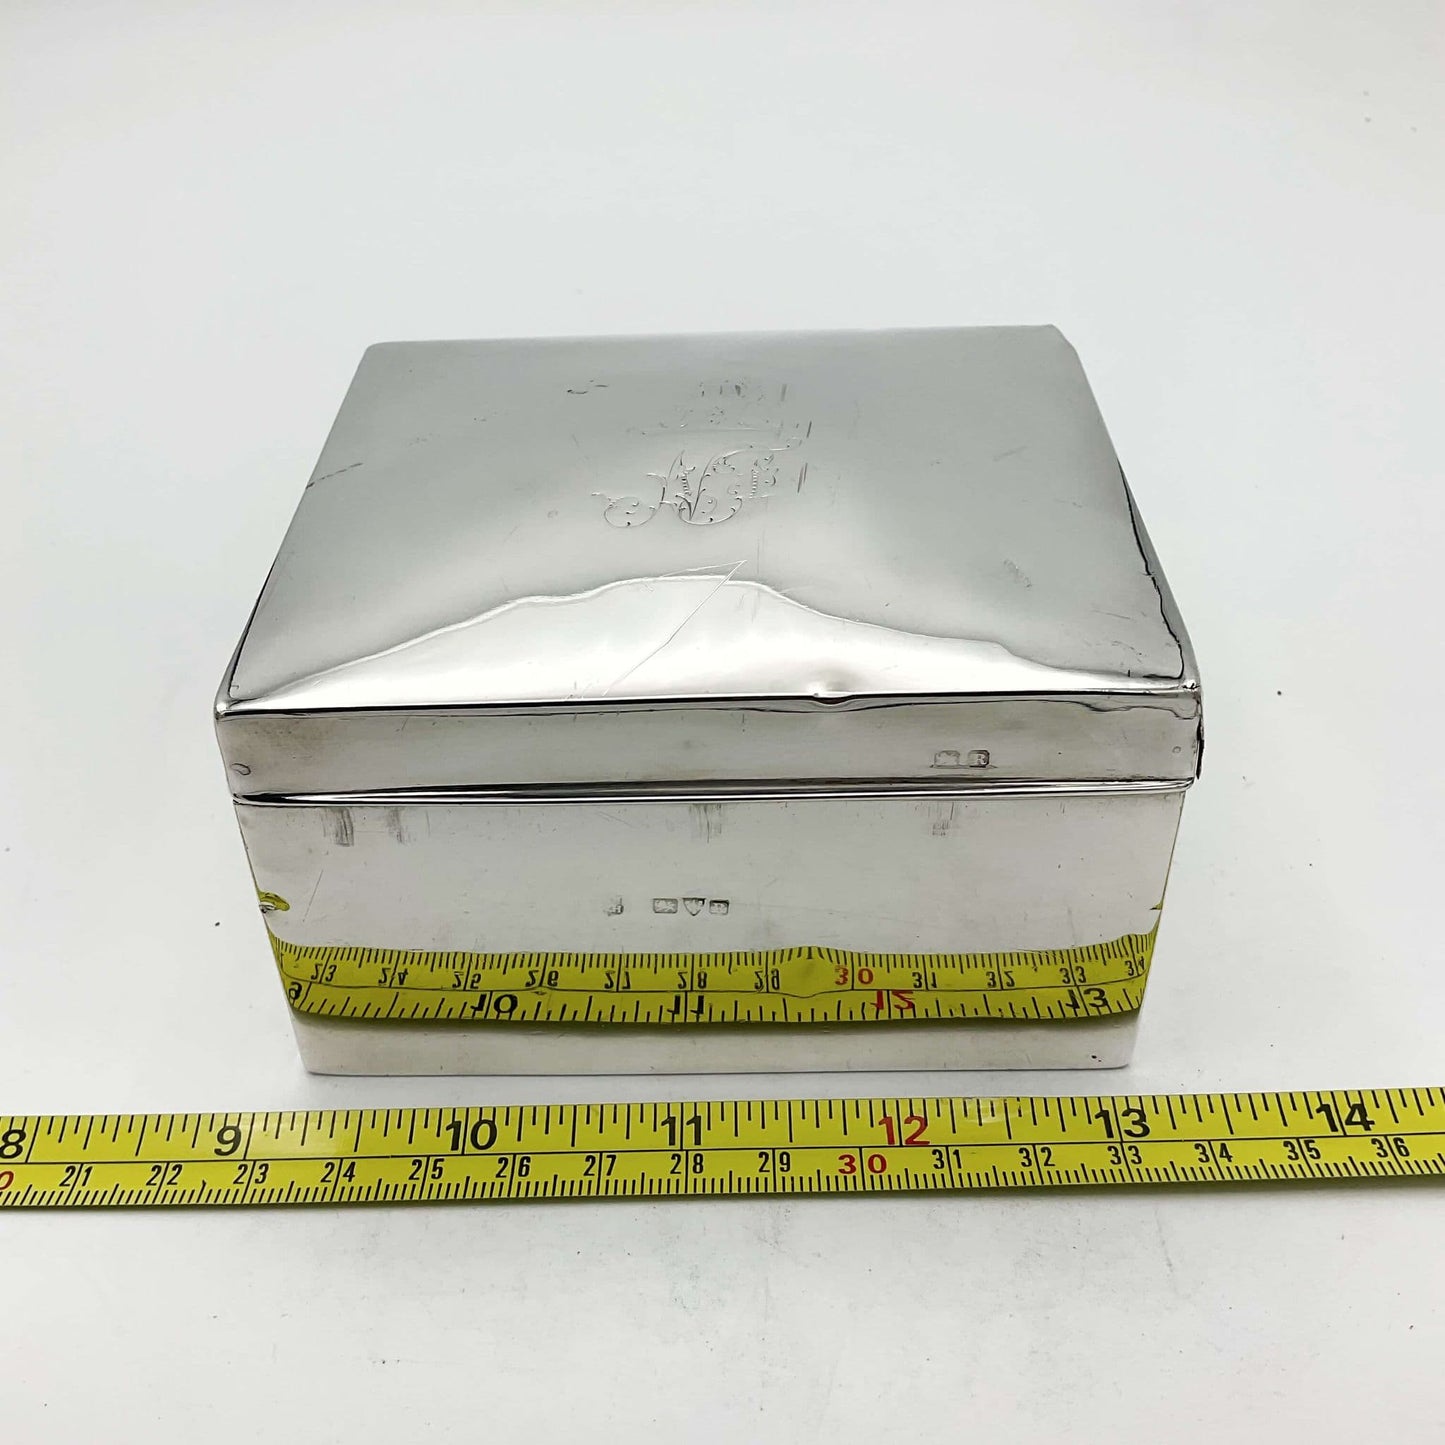 Antique Sterling Silver Cigarette Box next to a tape measure showing the width as approximately 10cm 